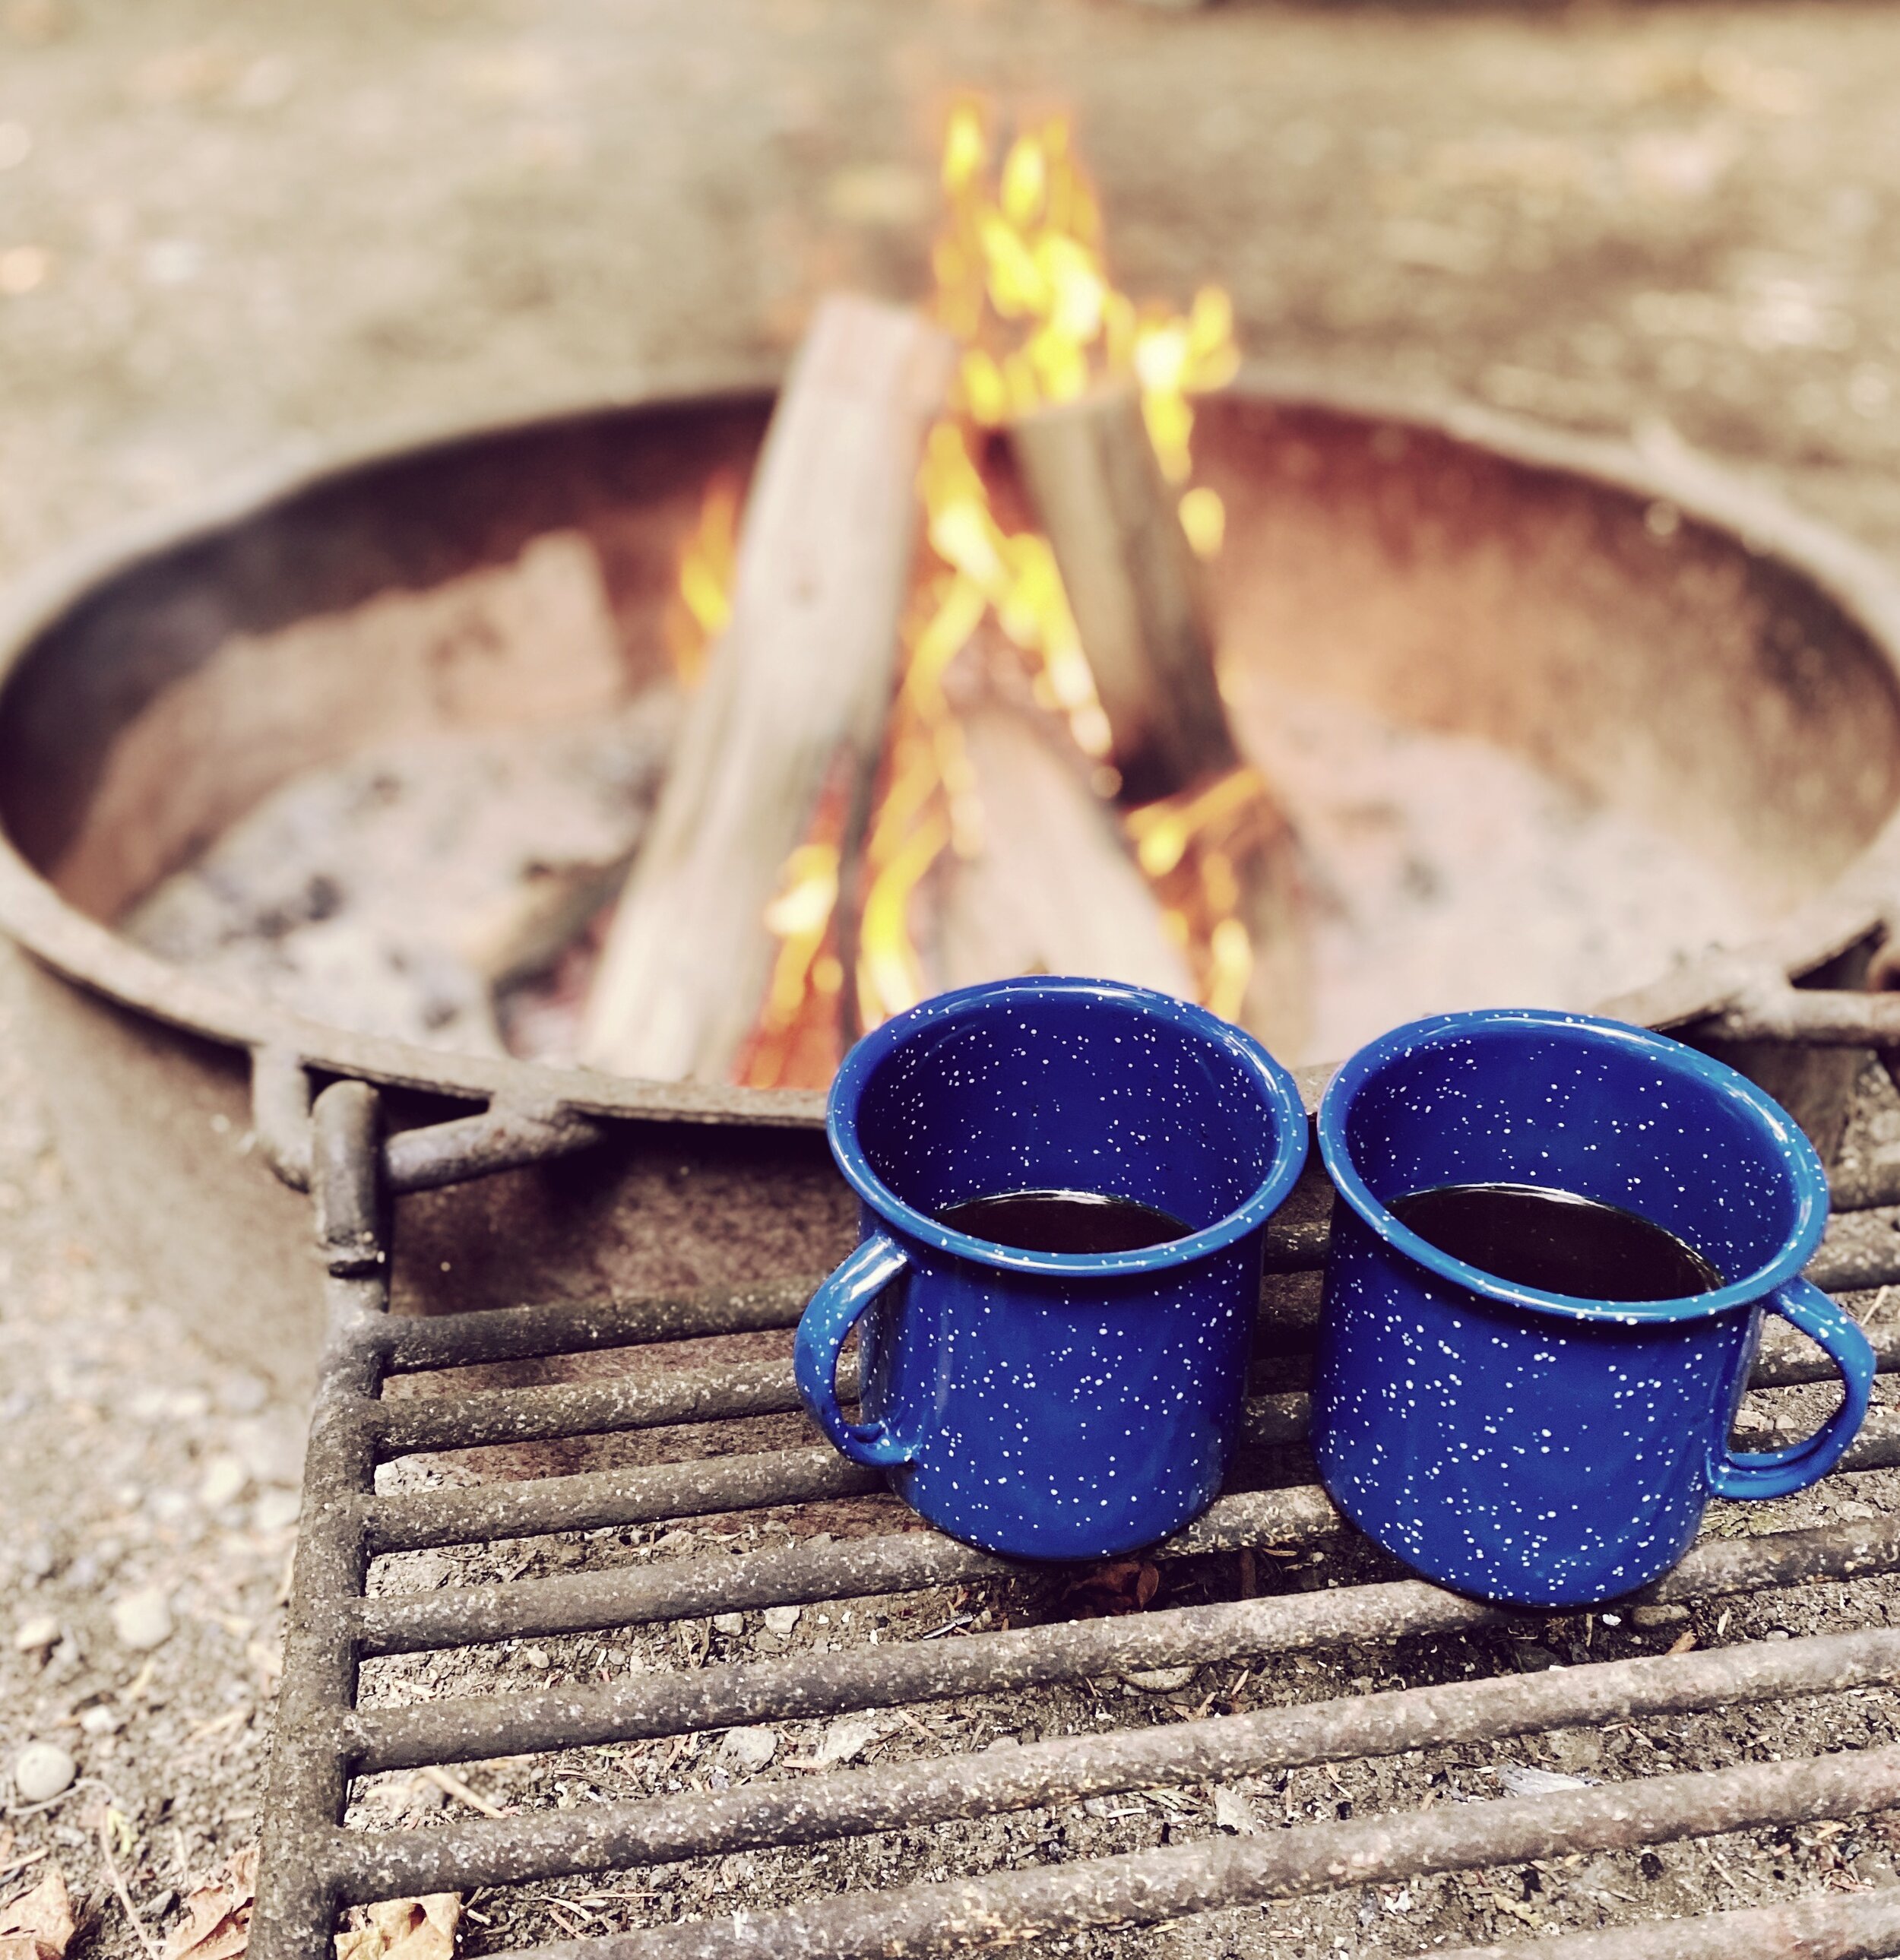 Morning coffee by the campfire